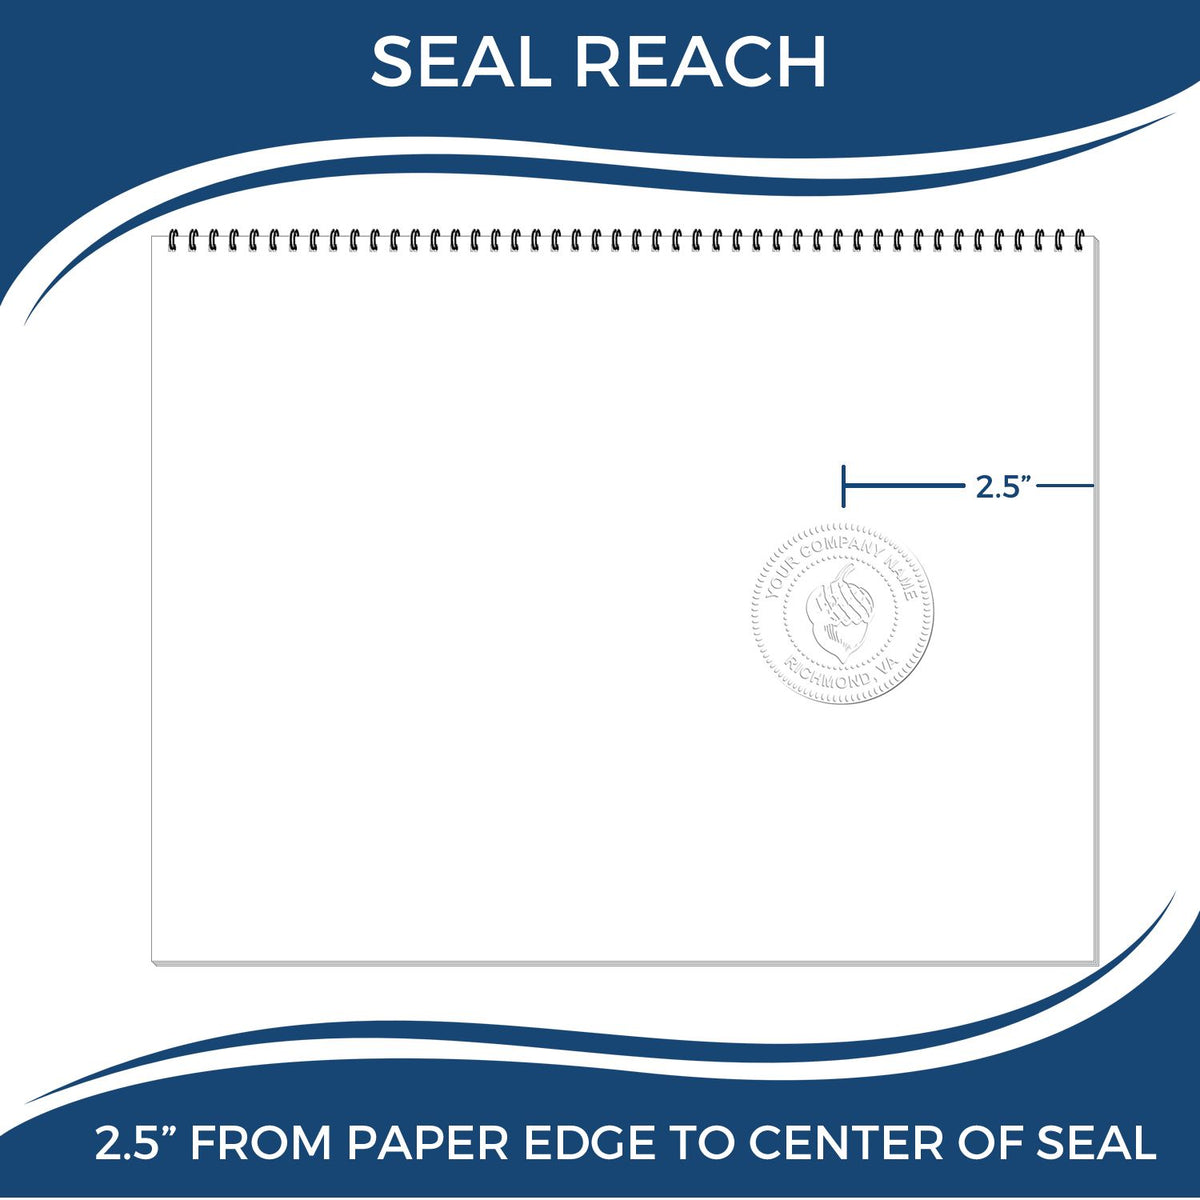 An infographic showing the seal reach which is represented by a ruler and a miniature seal image of the Heavy Duty Cast Iron Maine Land Surveyor Seal Embosser